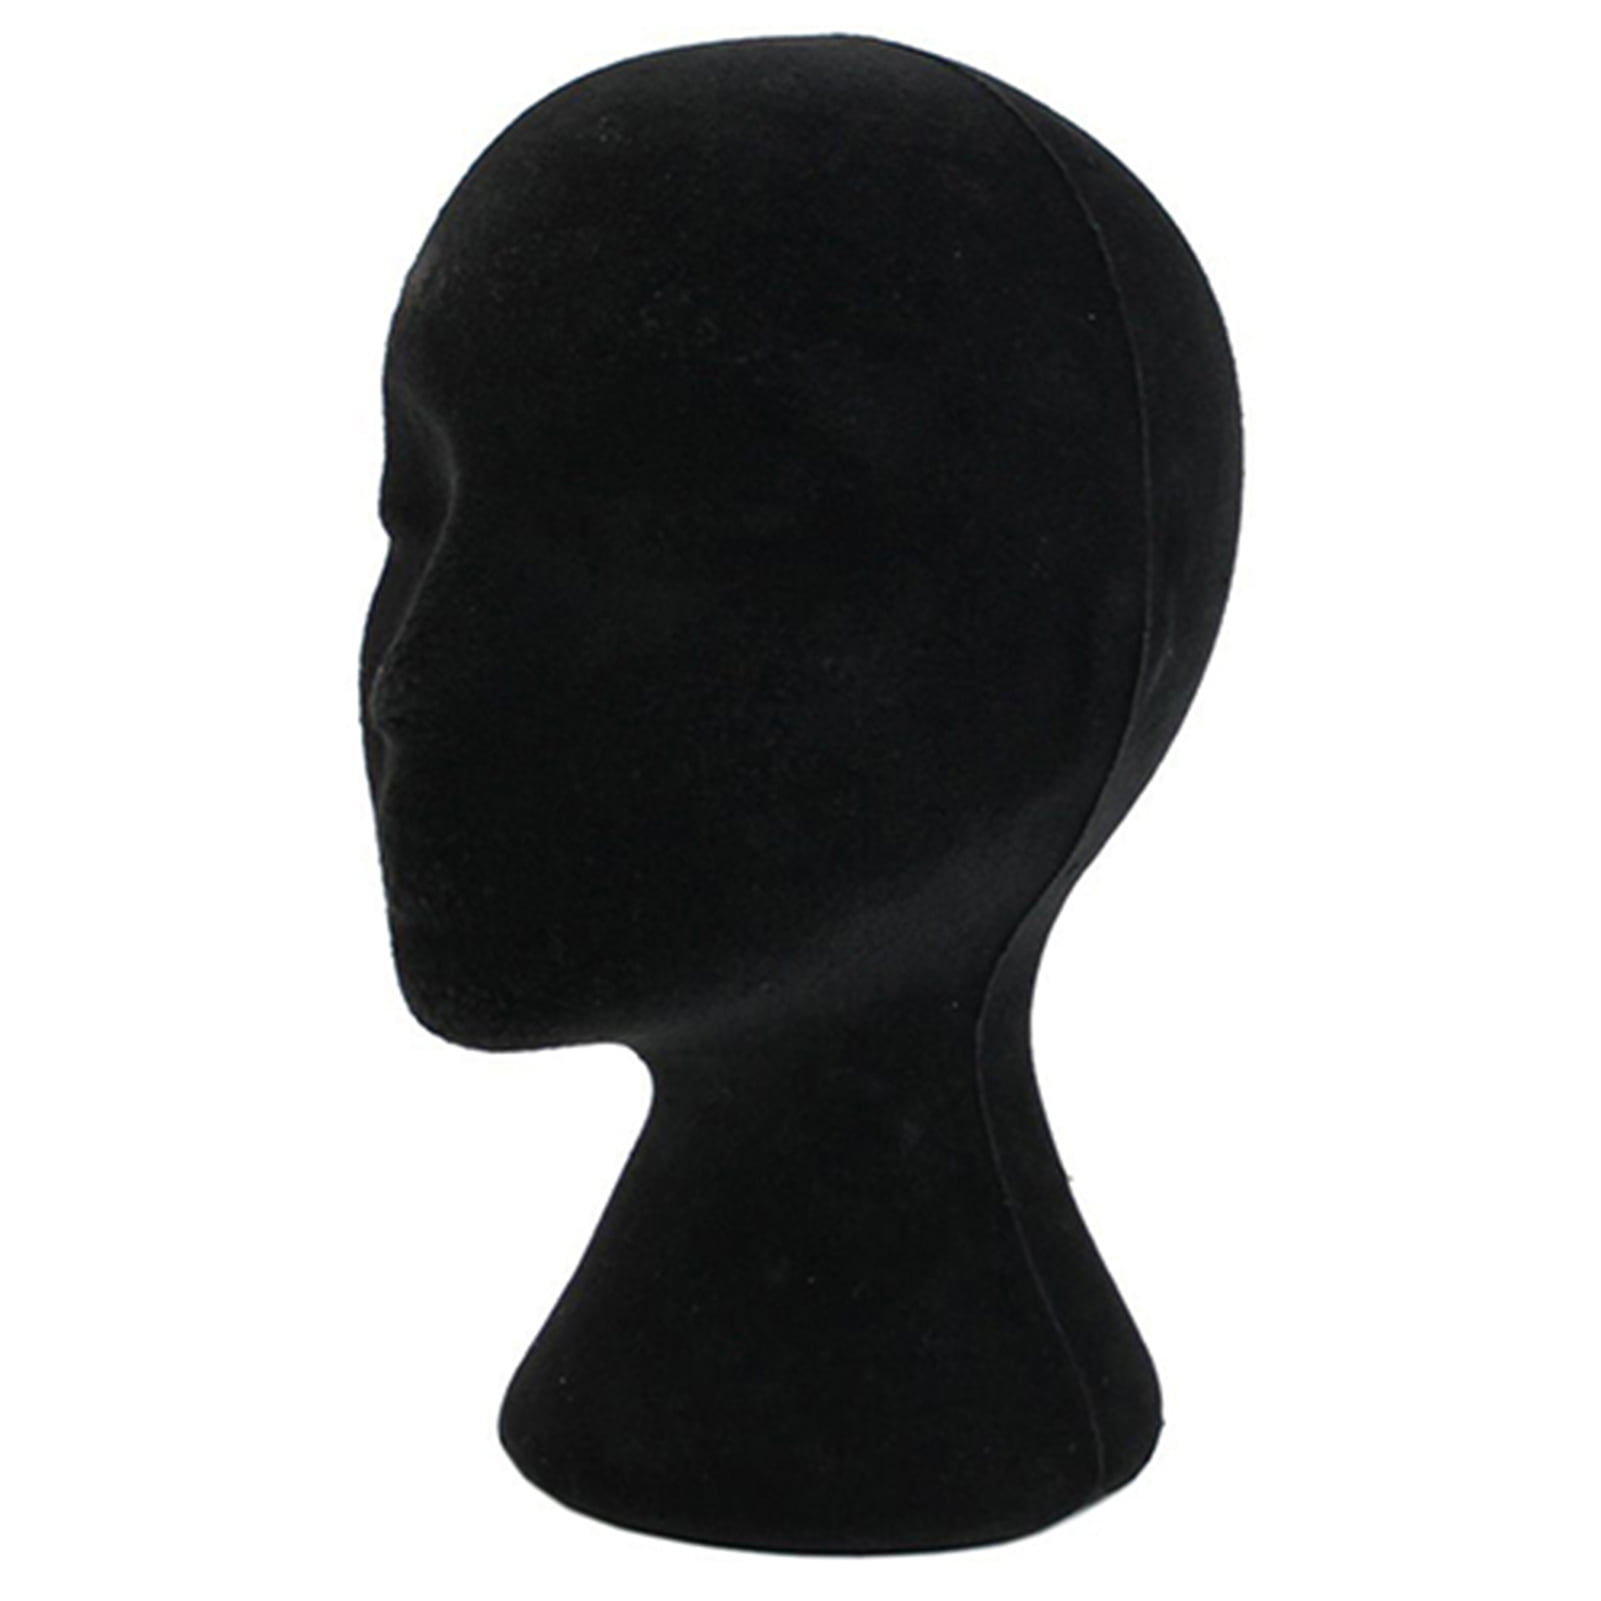 Mannequin Head Male Face Model Display Stand For Wigs Hat Glasses Mask  Black NEW